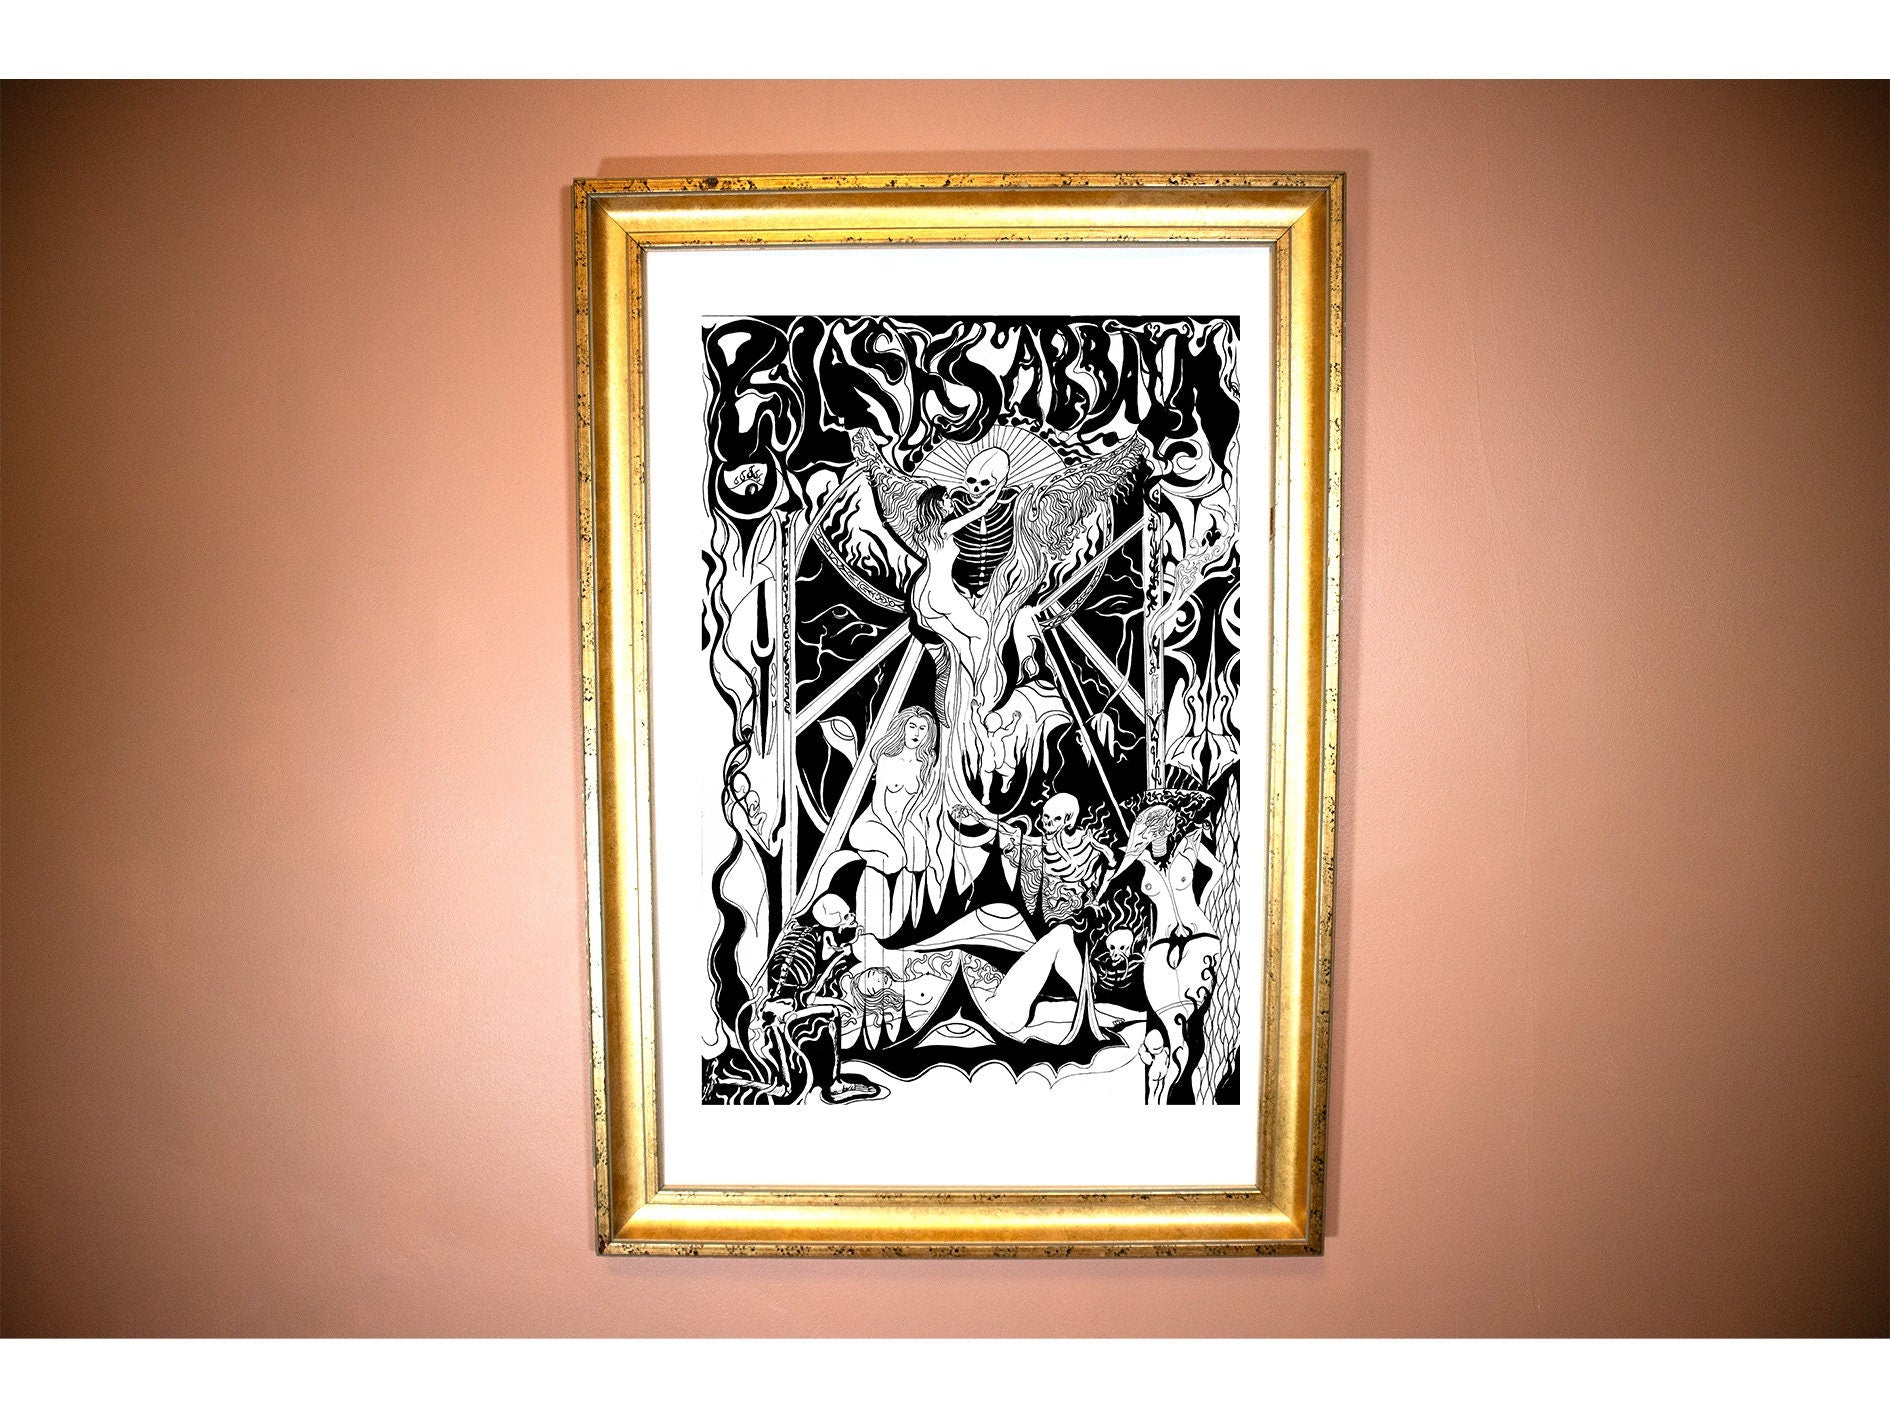 a framed picture of  A black and white gothic pen and ink poster for the band black sabbath in an art nouveau style showing a black mass conducted by demons and Skelletons